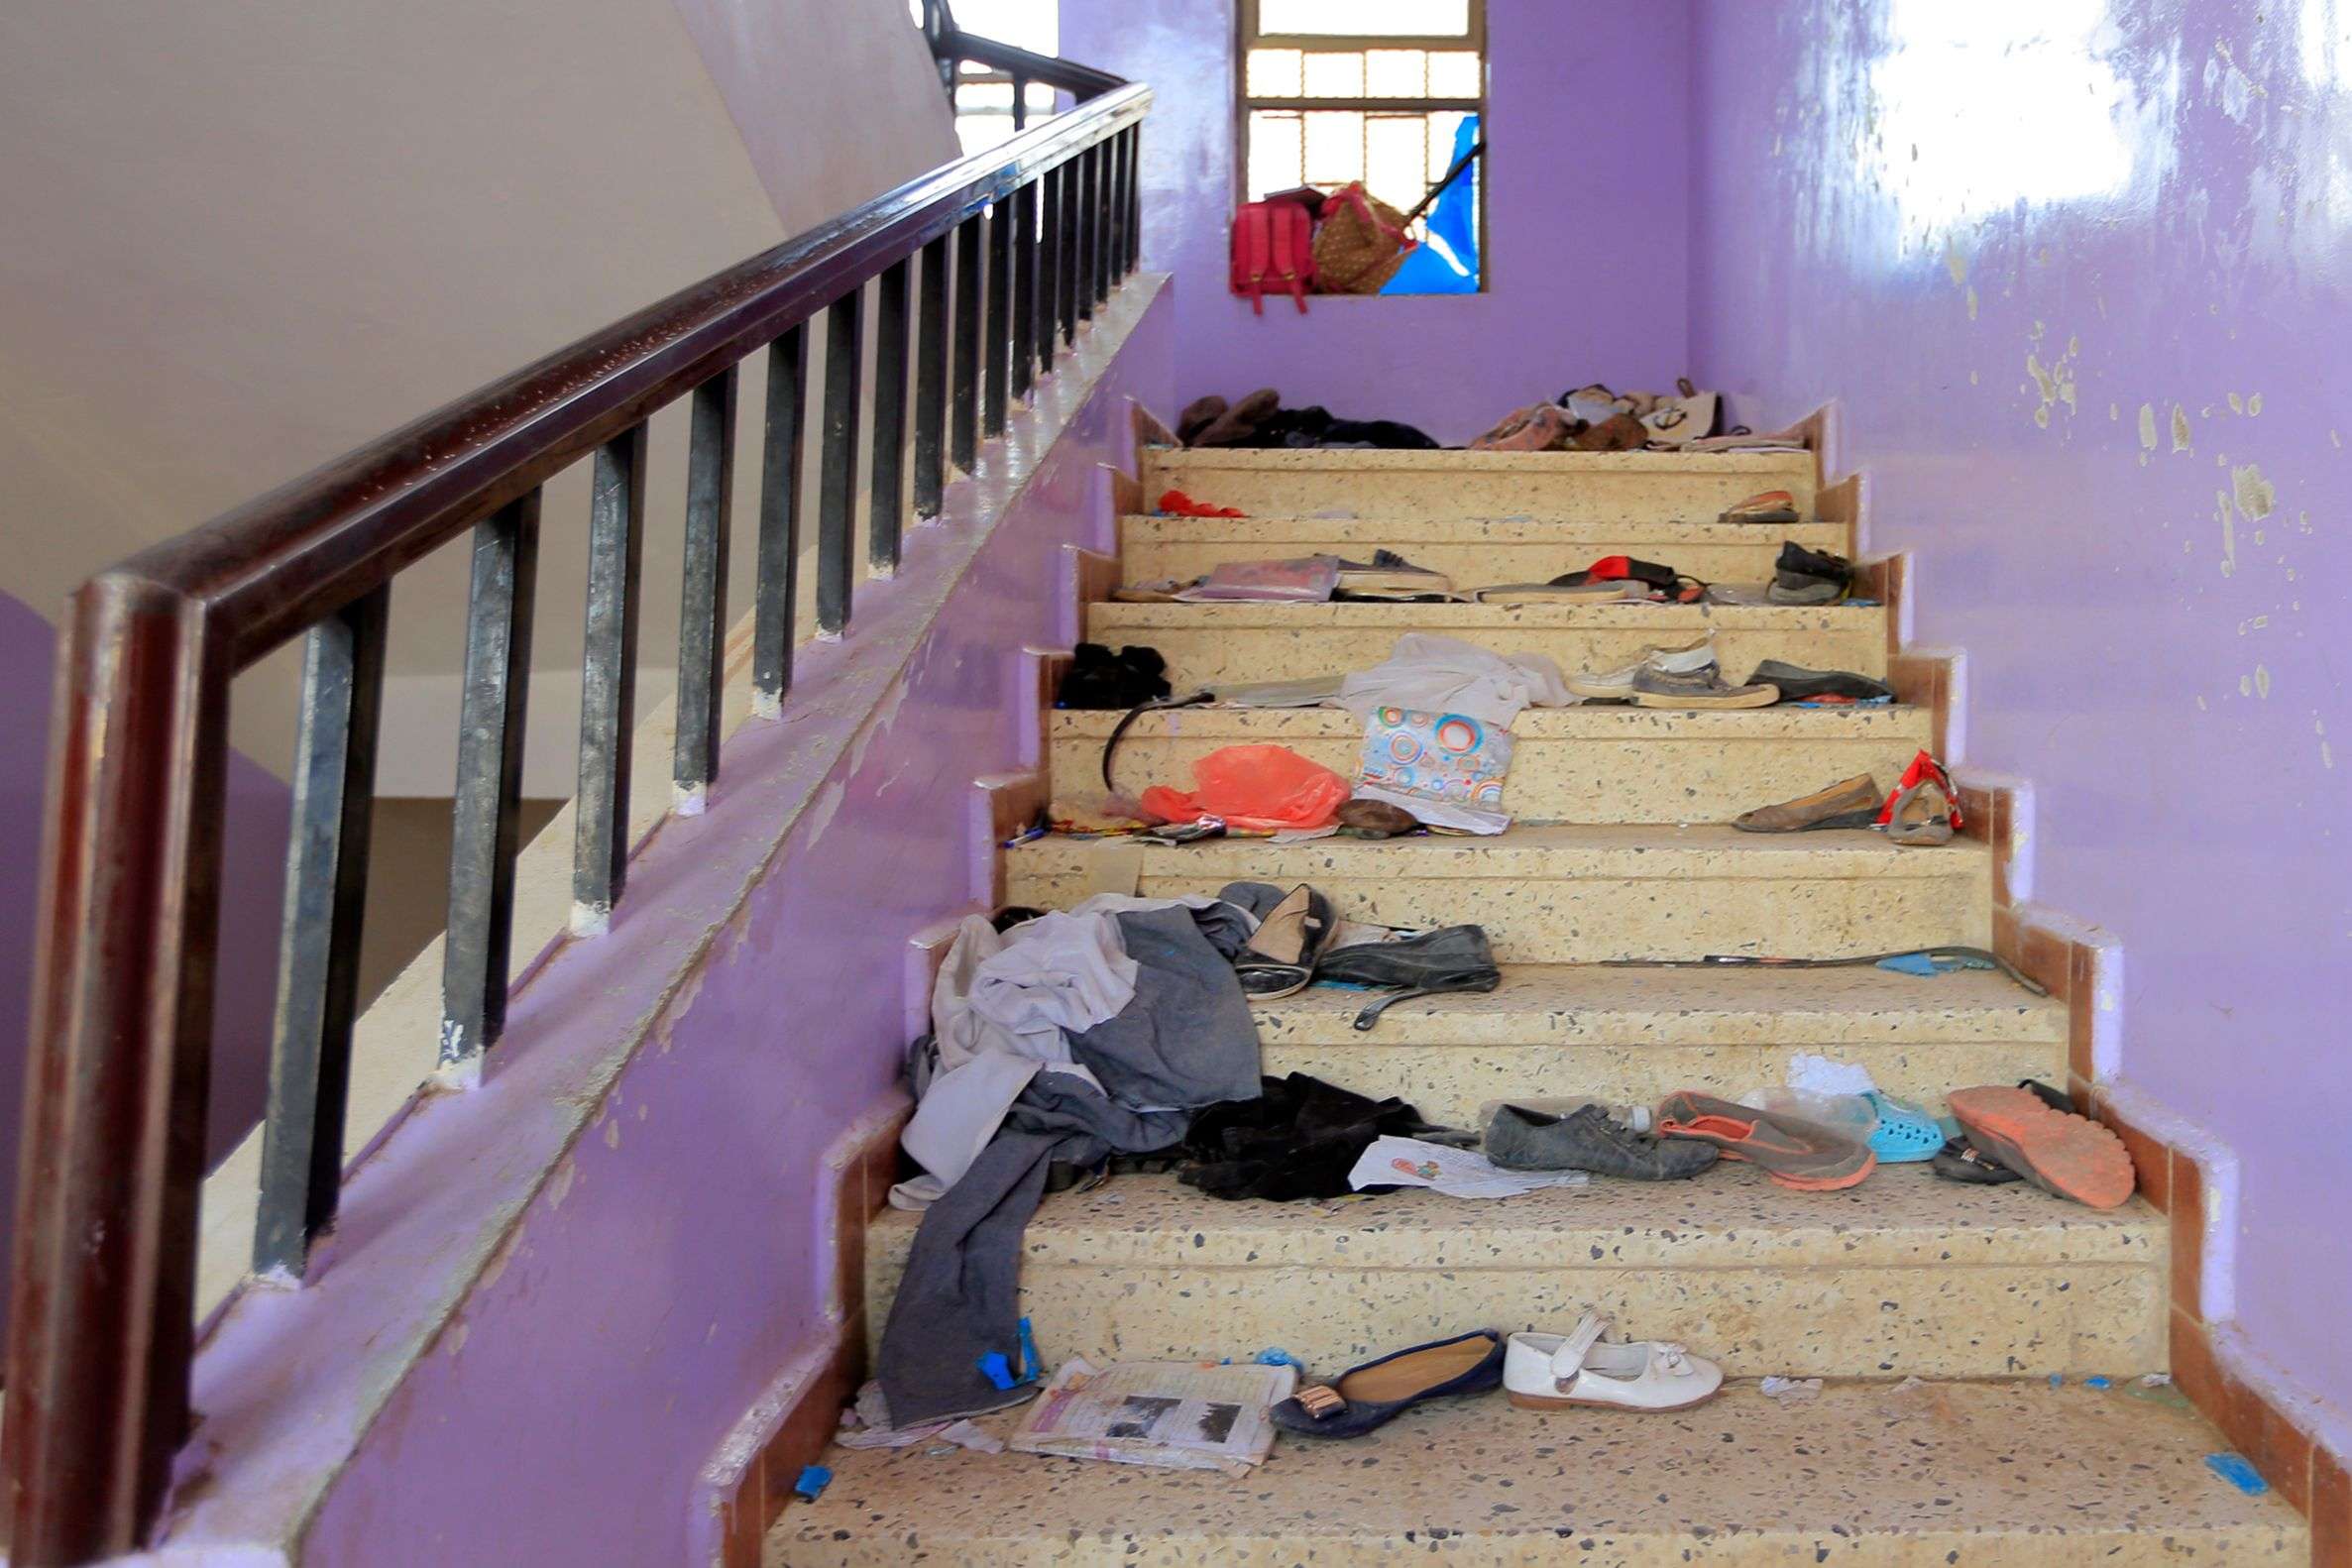 The belongings of Yemeni students are seen scattered on a staircase at a school in the capital Sanaa on April 7, 2019, following the deaths of 11 civilians including students in Yemen's capital.